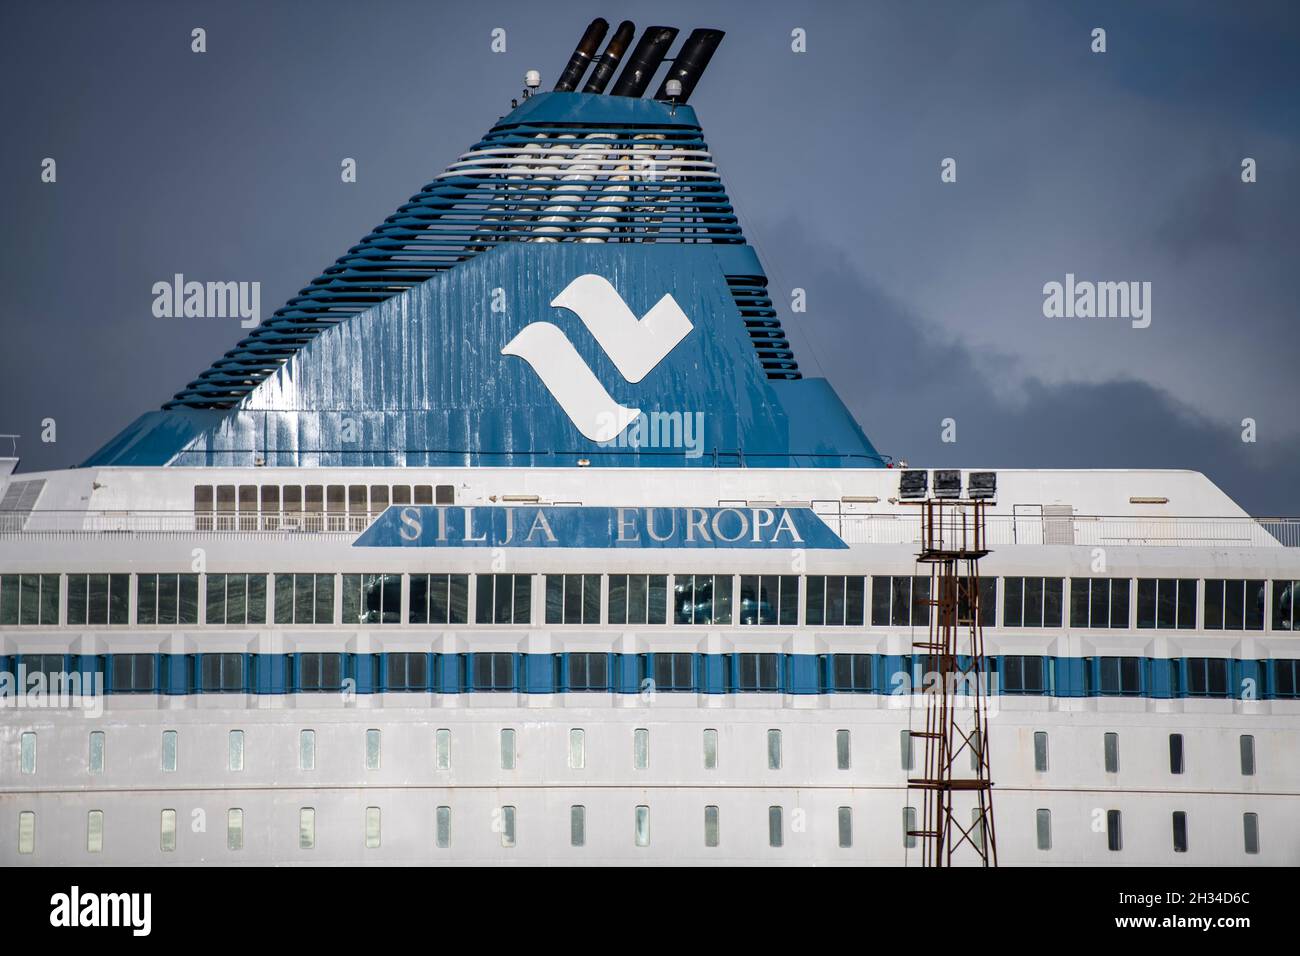 Glasgow, Scotland, UK. 25th Oct, 2021. PICTURED: COP26 delegate accommodation in a form of one of two cruise ships which is pictured in Greenock - MS Silja Europa, will provide 3,123 more beds. Shuttle buses will take those on board to and from the summit. The other Tallink's MS Romantika, which has capacity for 2,500 people, has already berthed at King George V dock. Credit: Colin Fisher/Alamy Live News Stock Photo